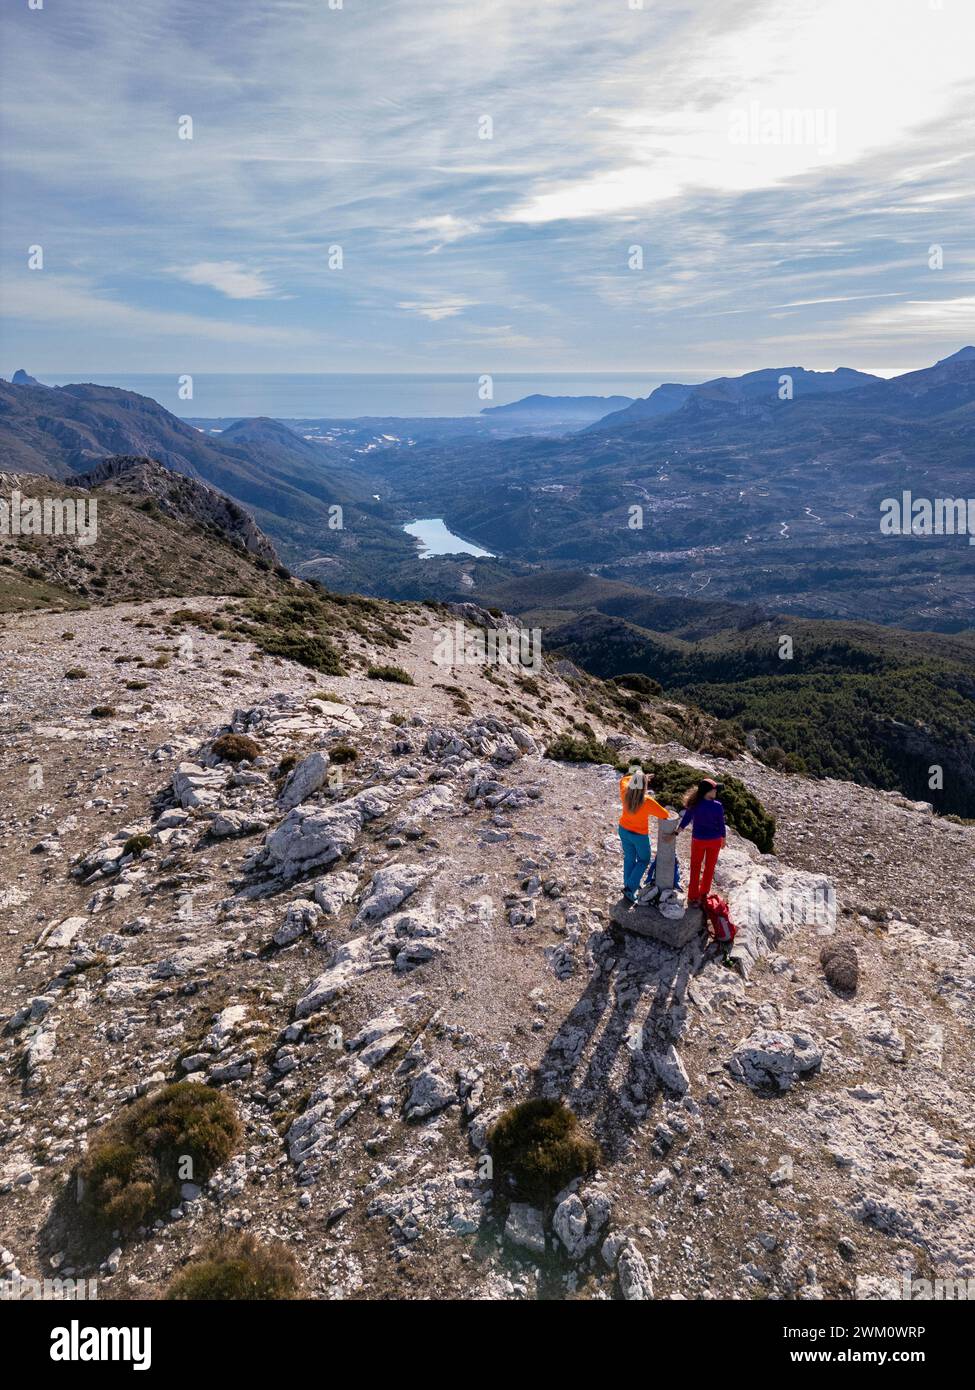 Two women hikers enjoying the beautiful nature from high above, Famorca, Alicante, Costa Blanca, Spain - stock photo Stock Photo